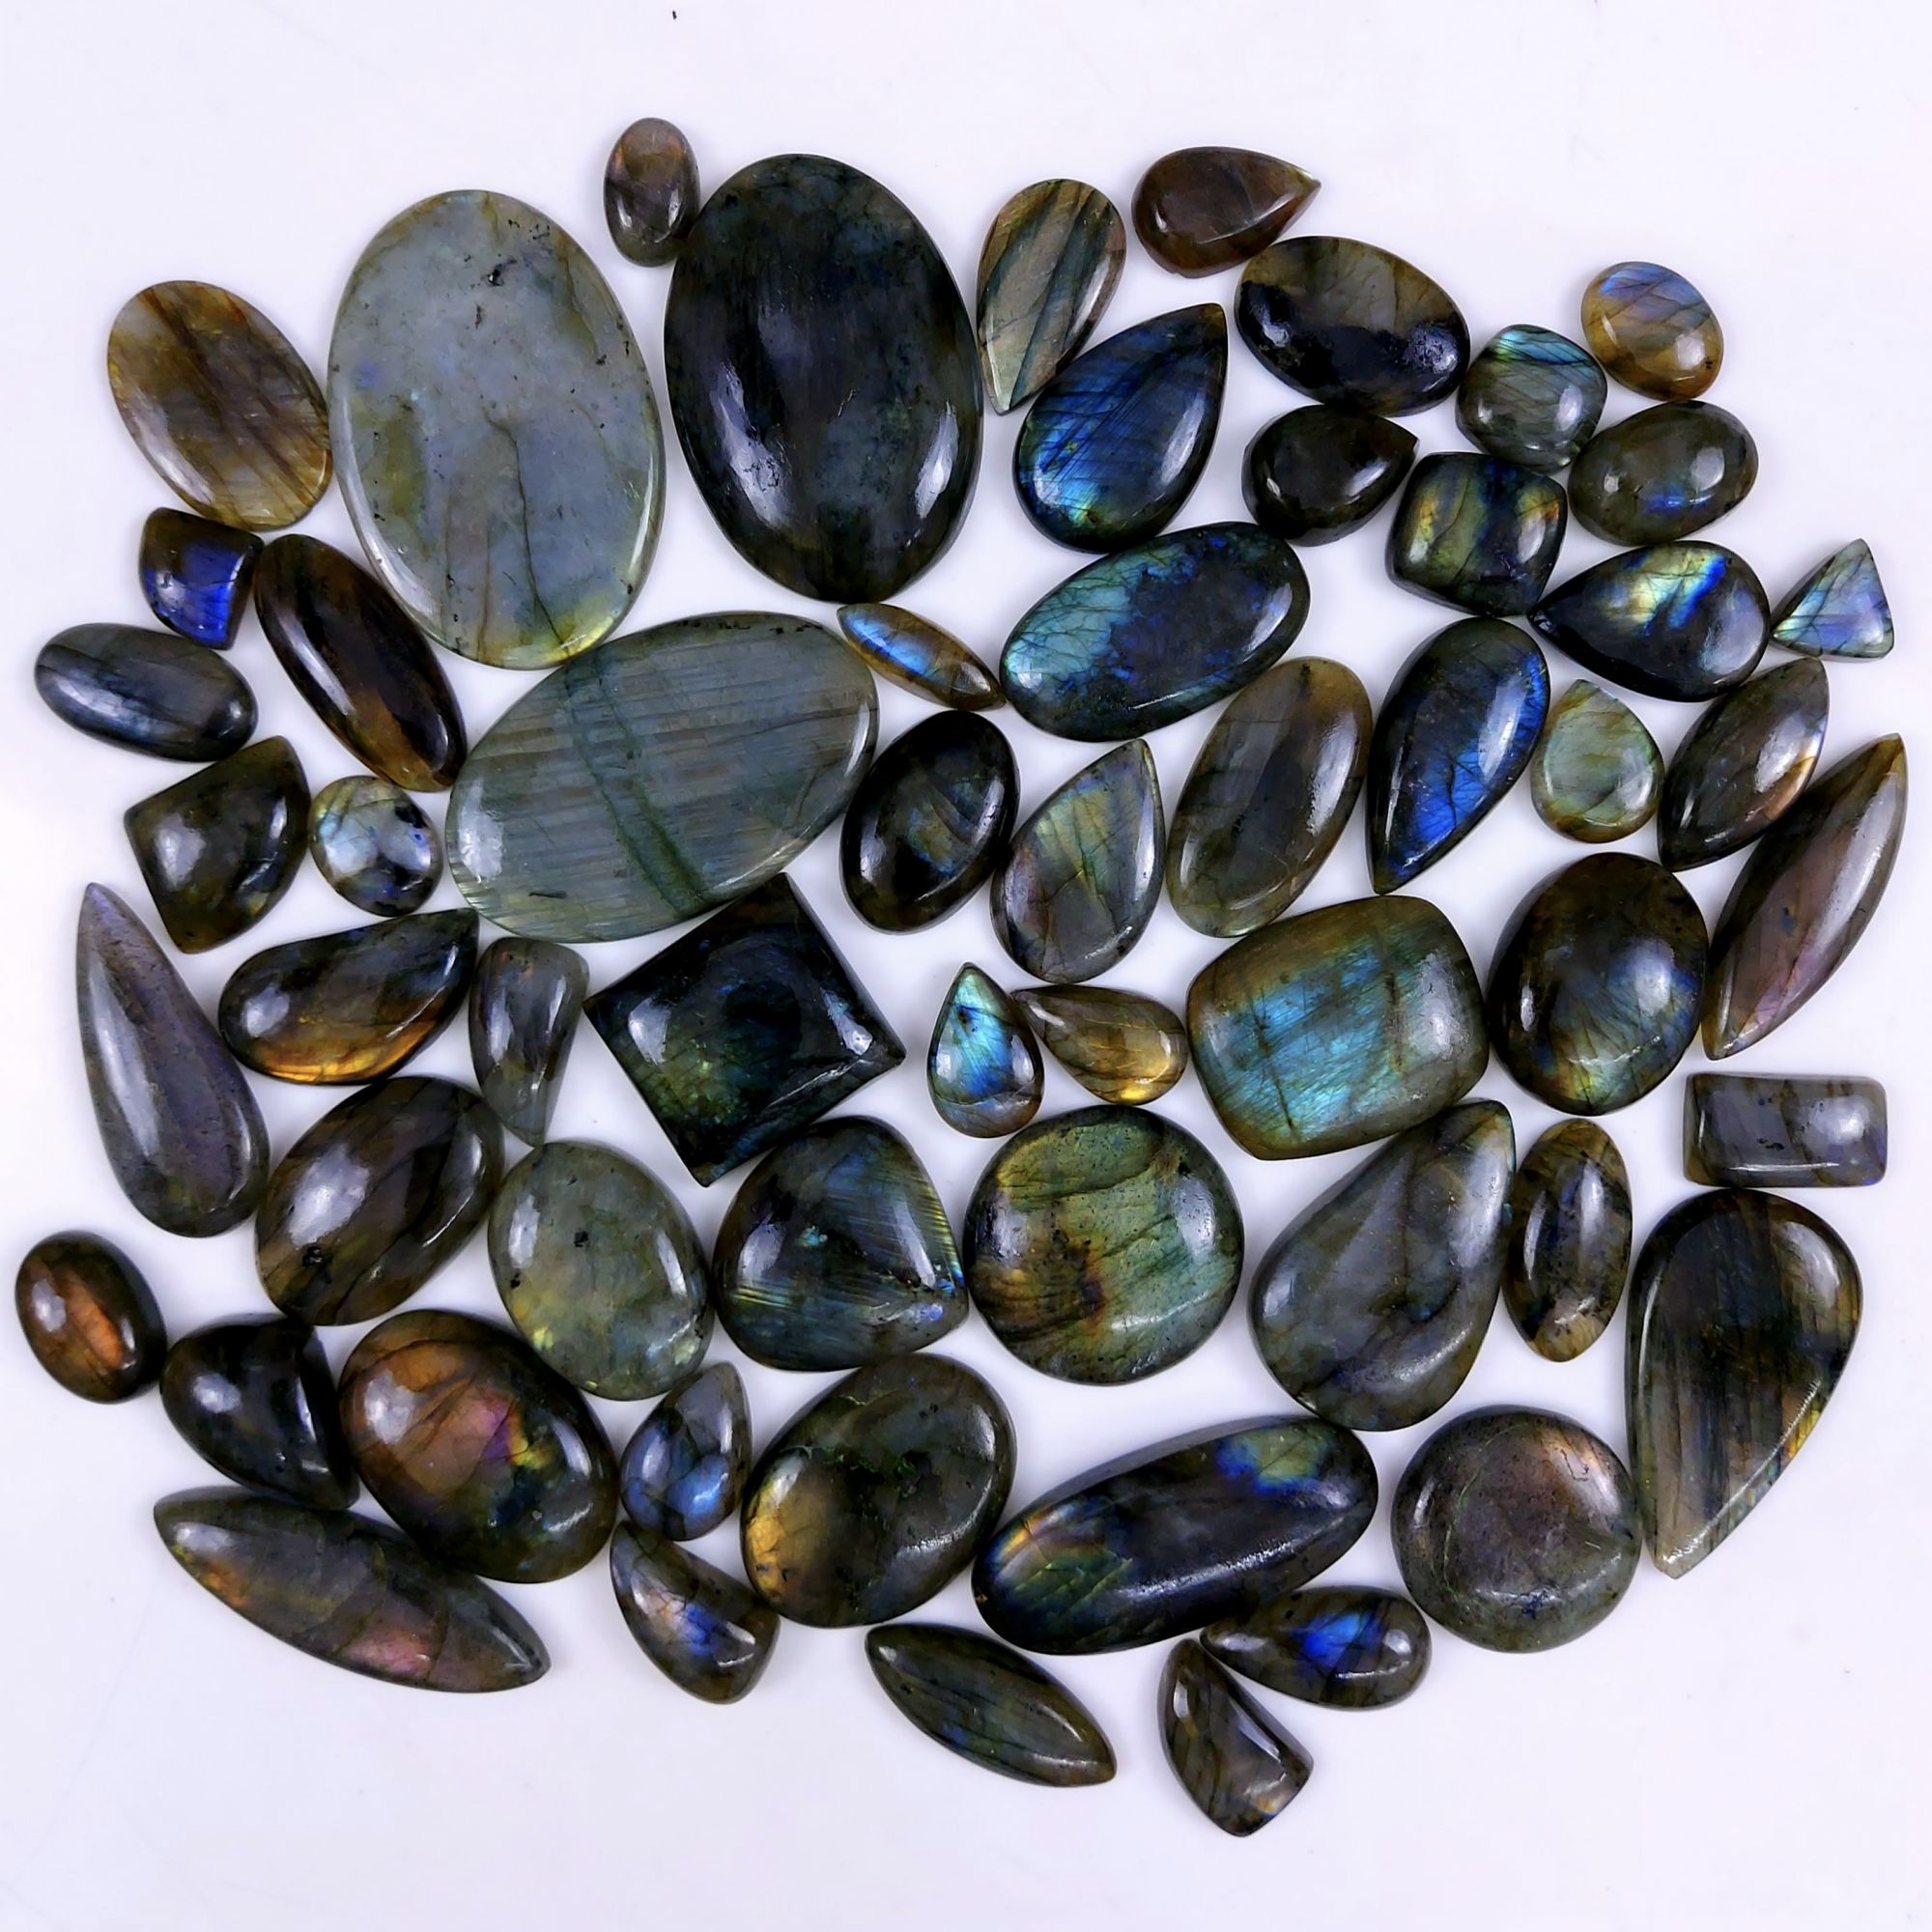 58pc 1800Cts Labradorite Cabochon Multifire Healing Crystal For Jewelry Supplies, Labradorite Necklace Handmade Wire Wrapped Gemstone Pendant 50x40 18x12mm#6293